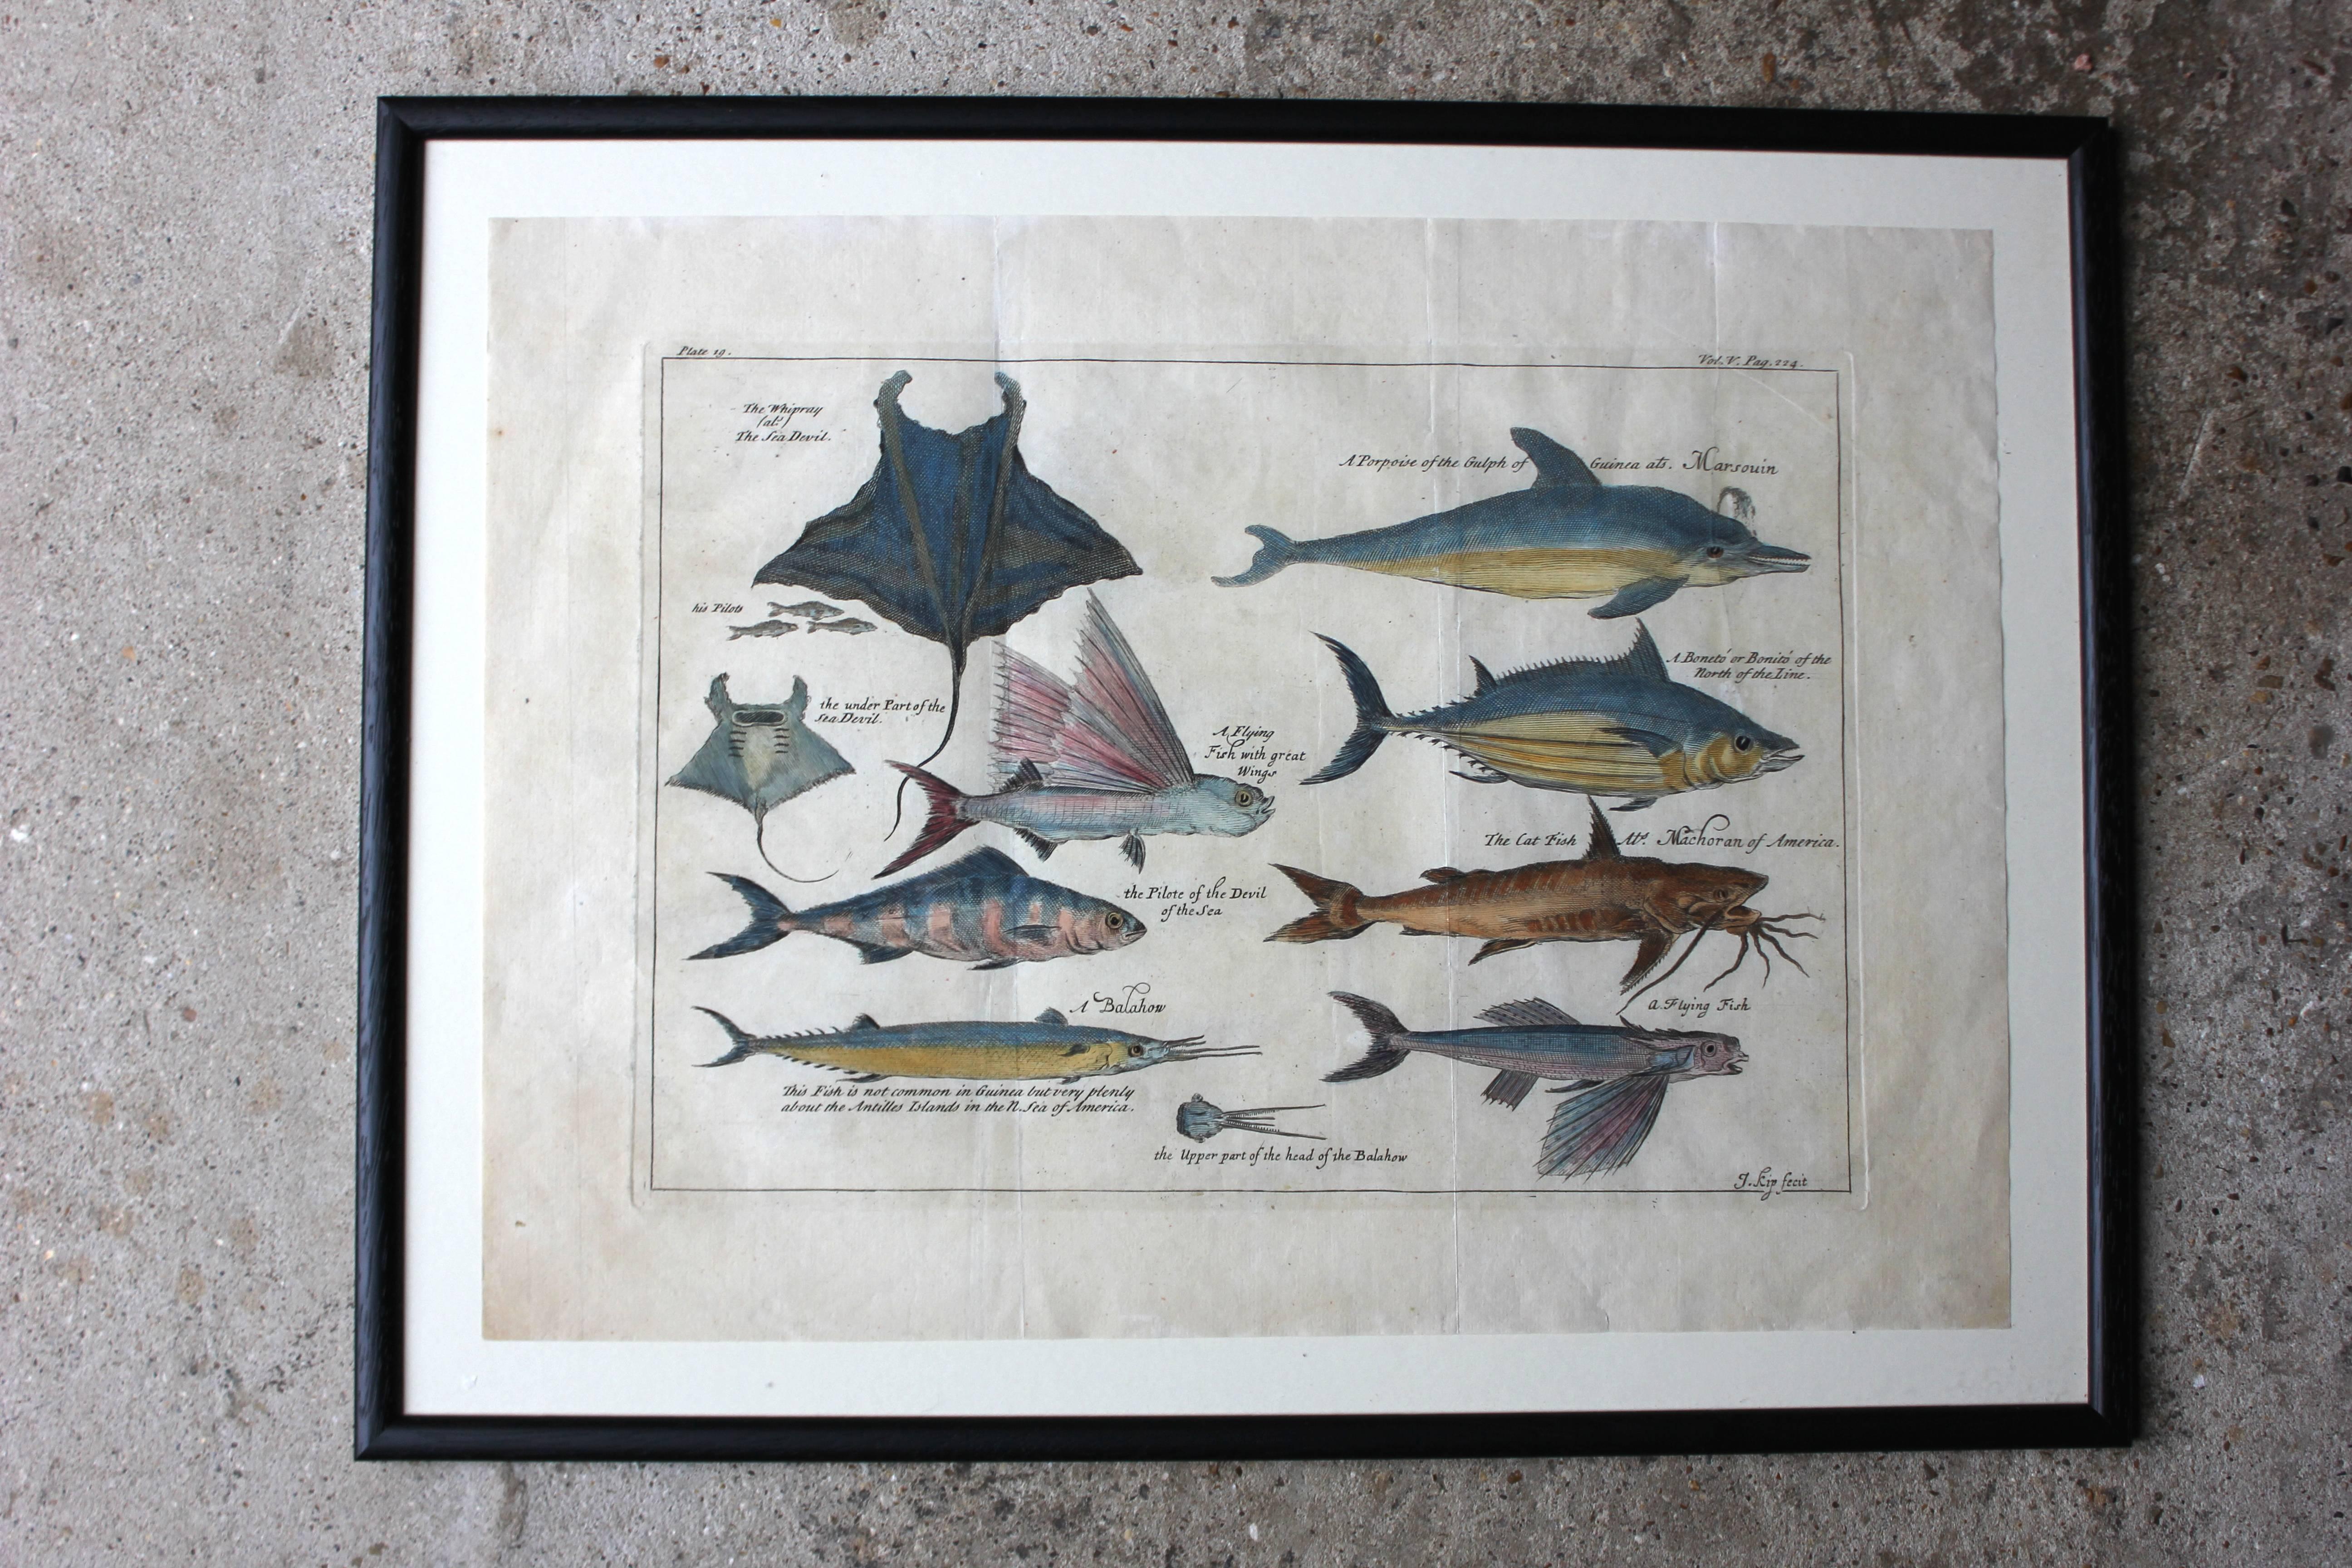 Hand-Colored Copper Plates of Fish from “a Collection of Voyages and Travels